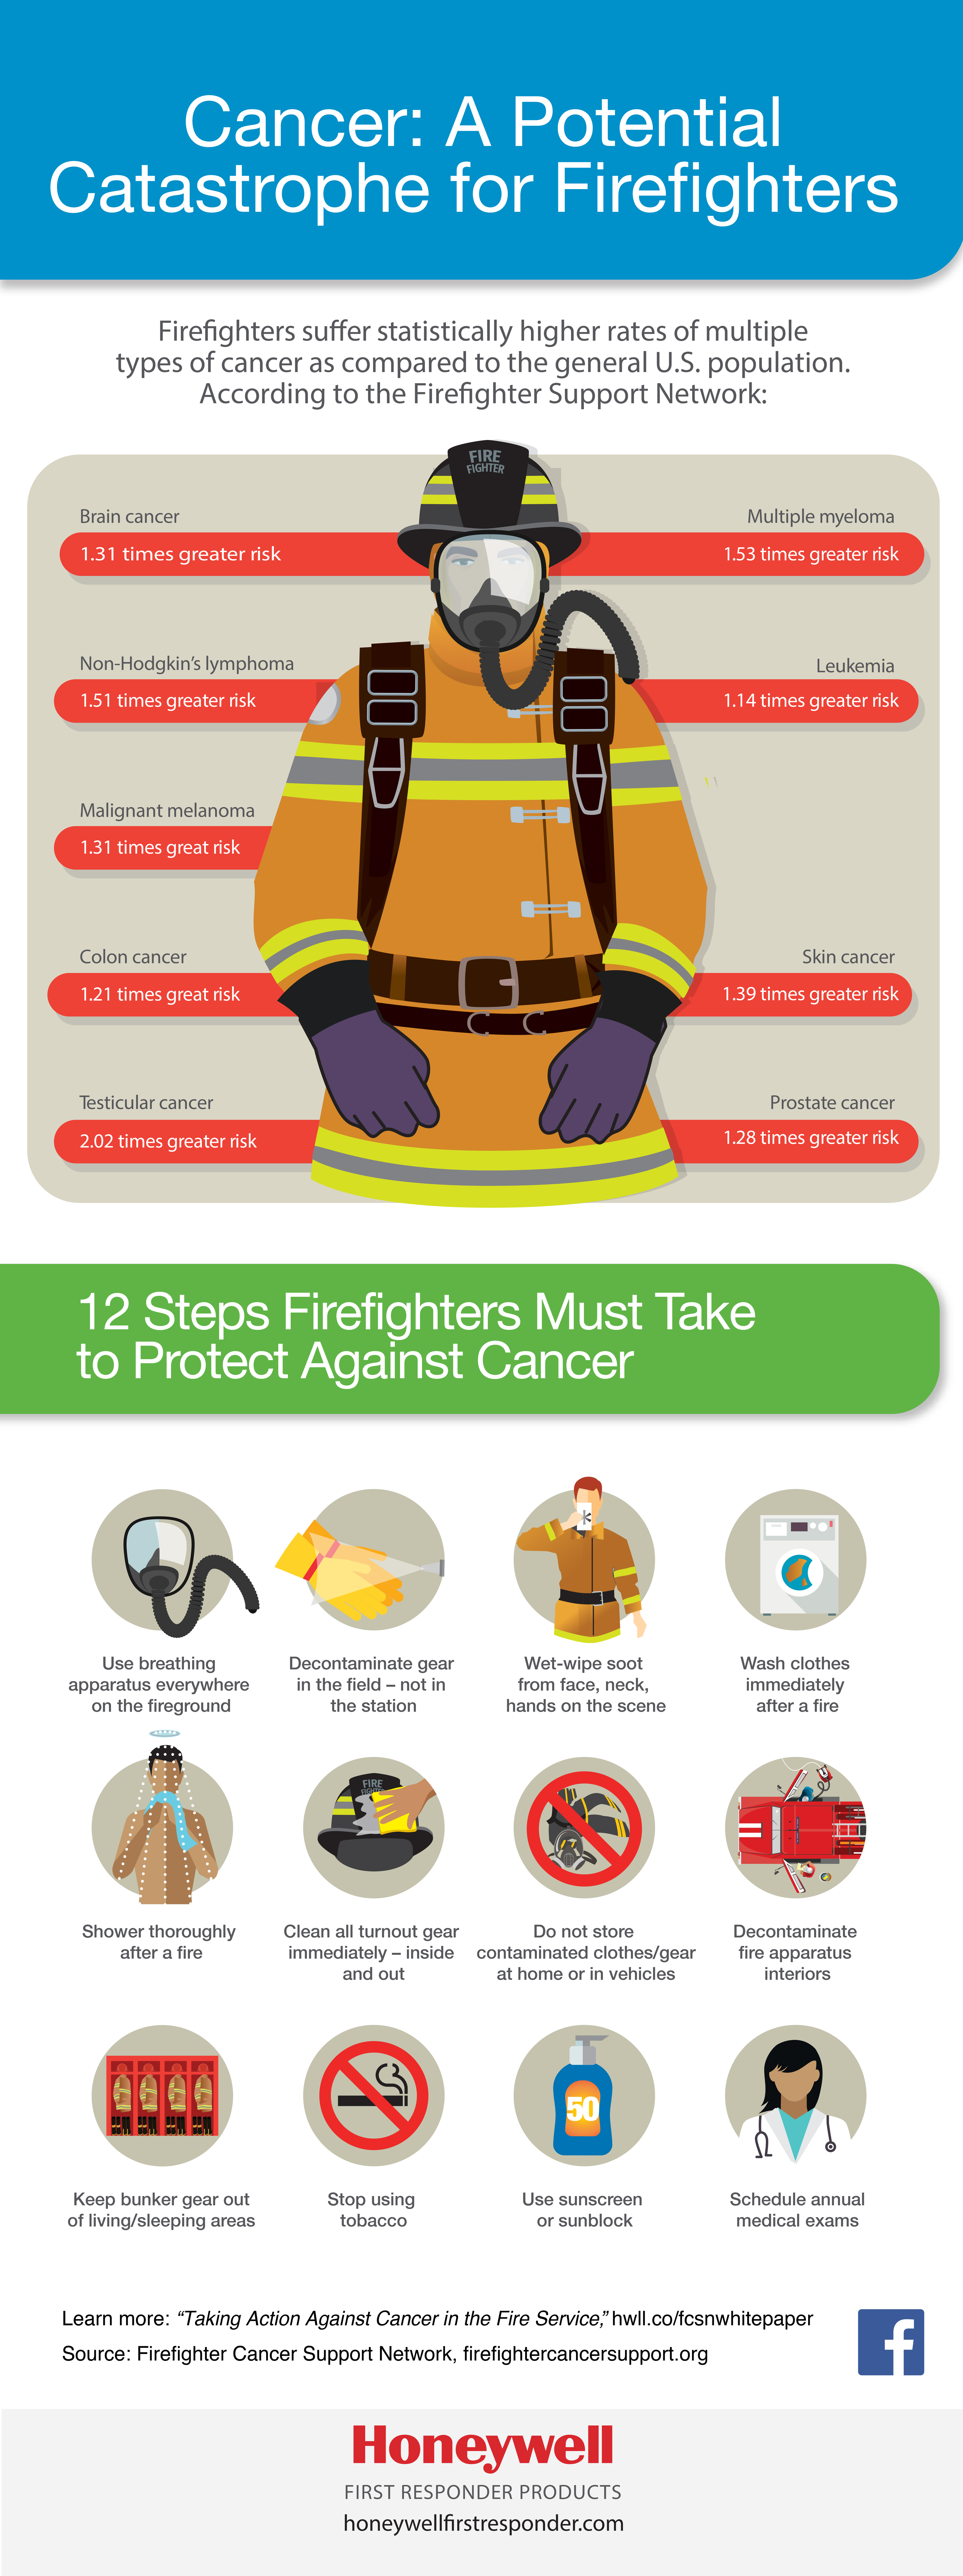 How to Help Protect First Responders from Cancer 